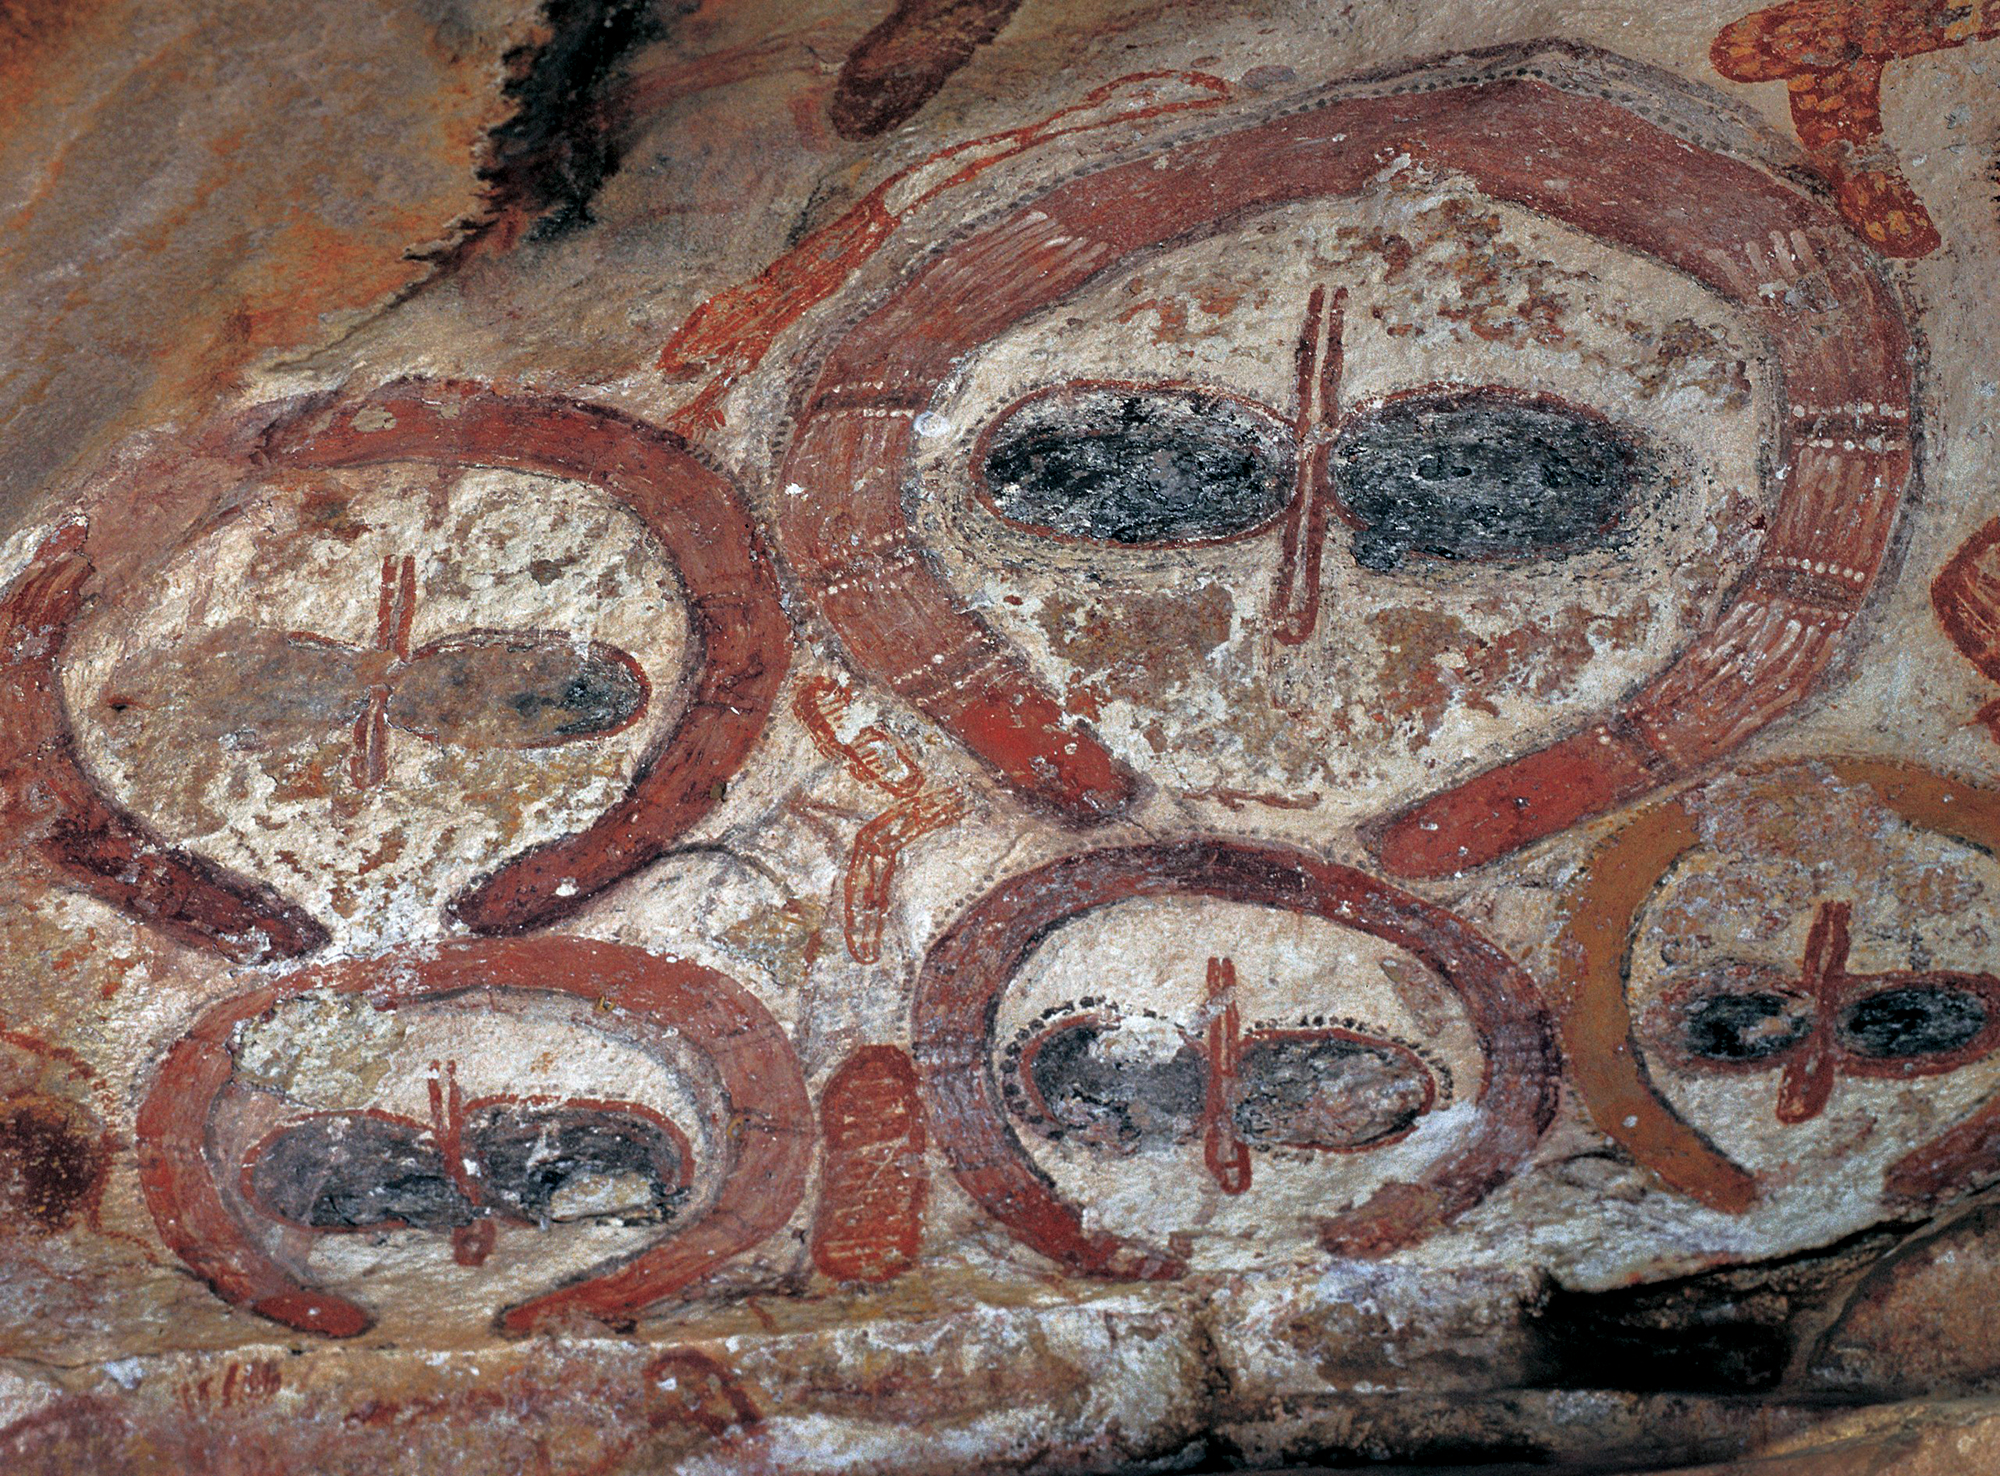 Wanjina paintings which depict the spirit ancestors and their representation in anthropomorphic form, forming a continuous Aboriginal tradition dating to the last 4000 years